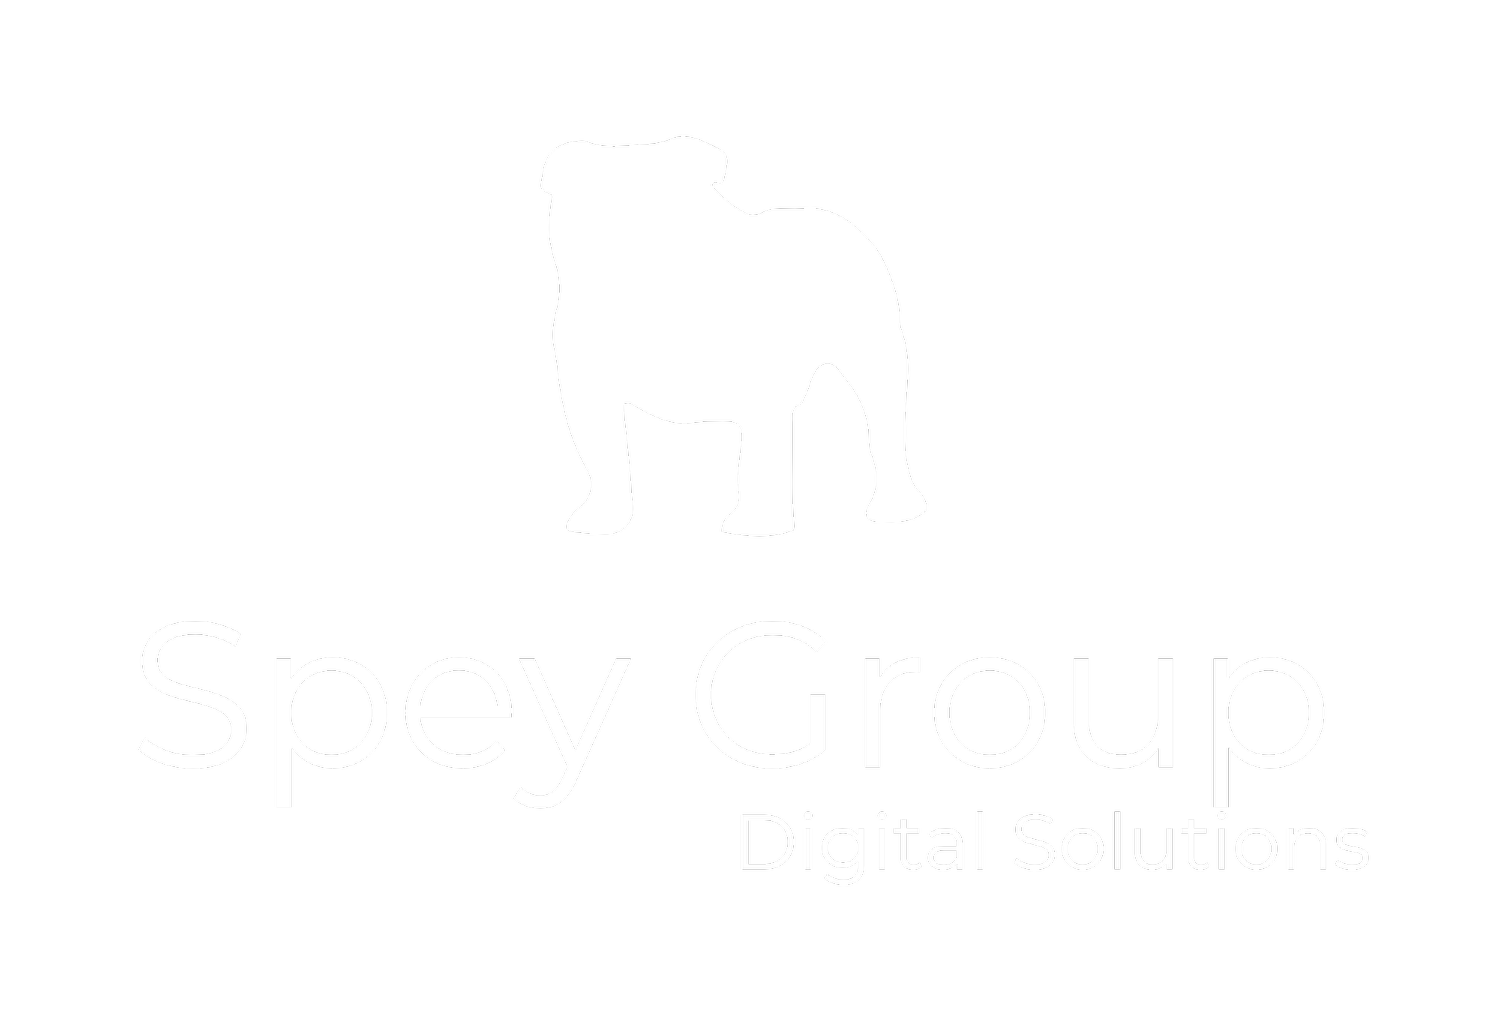 The Spey Group